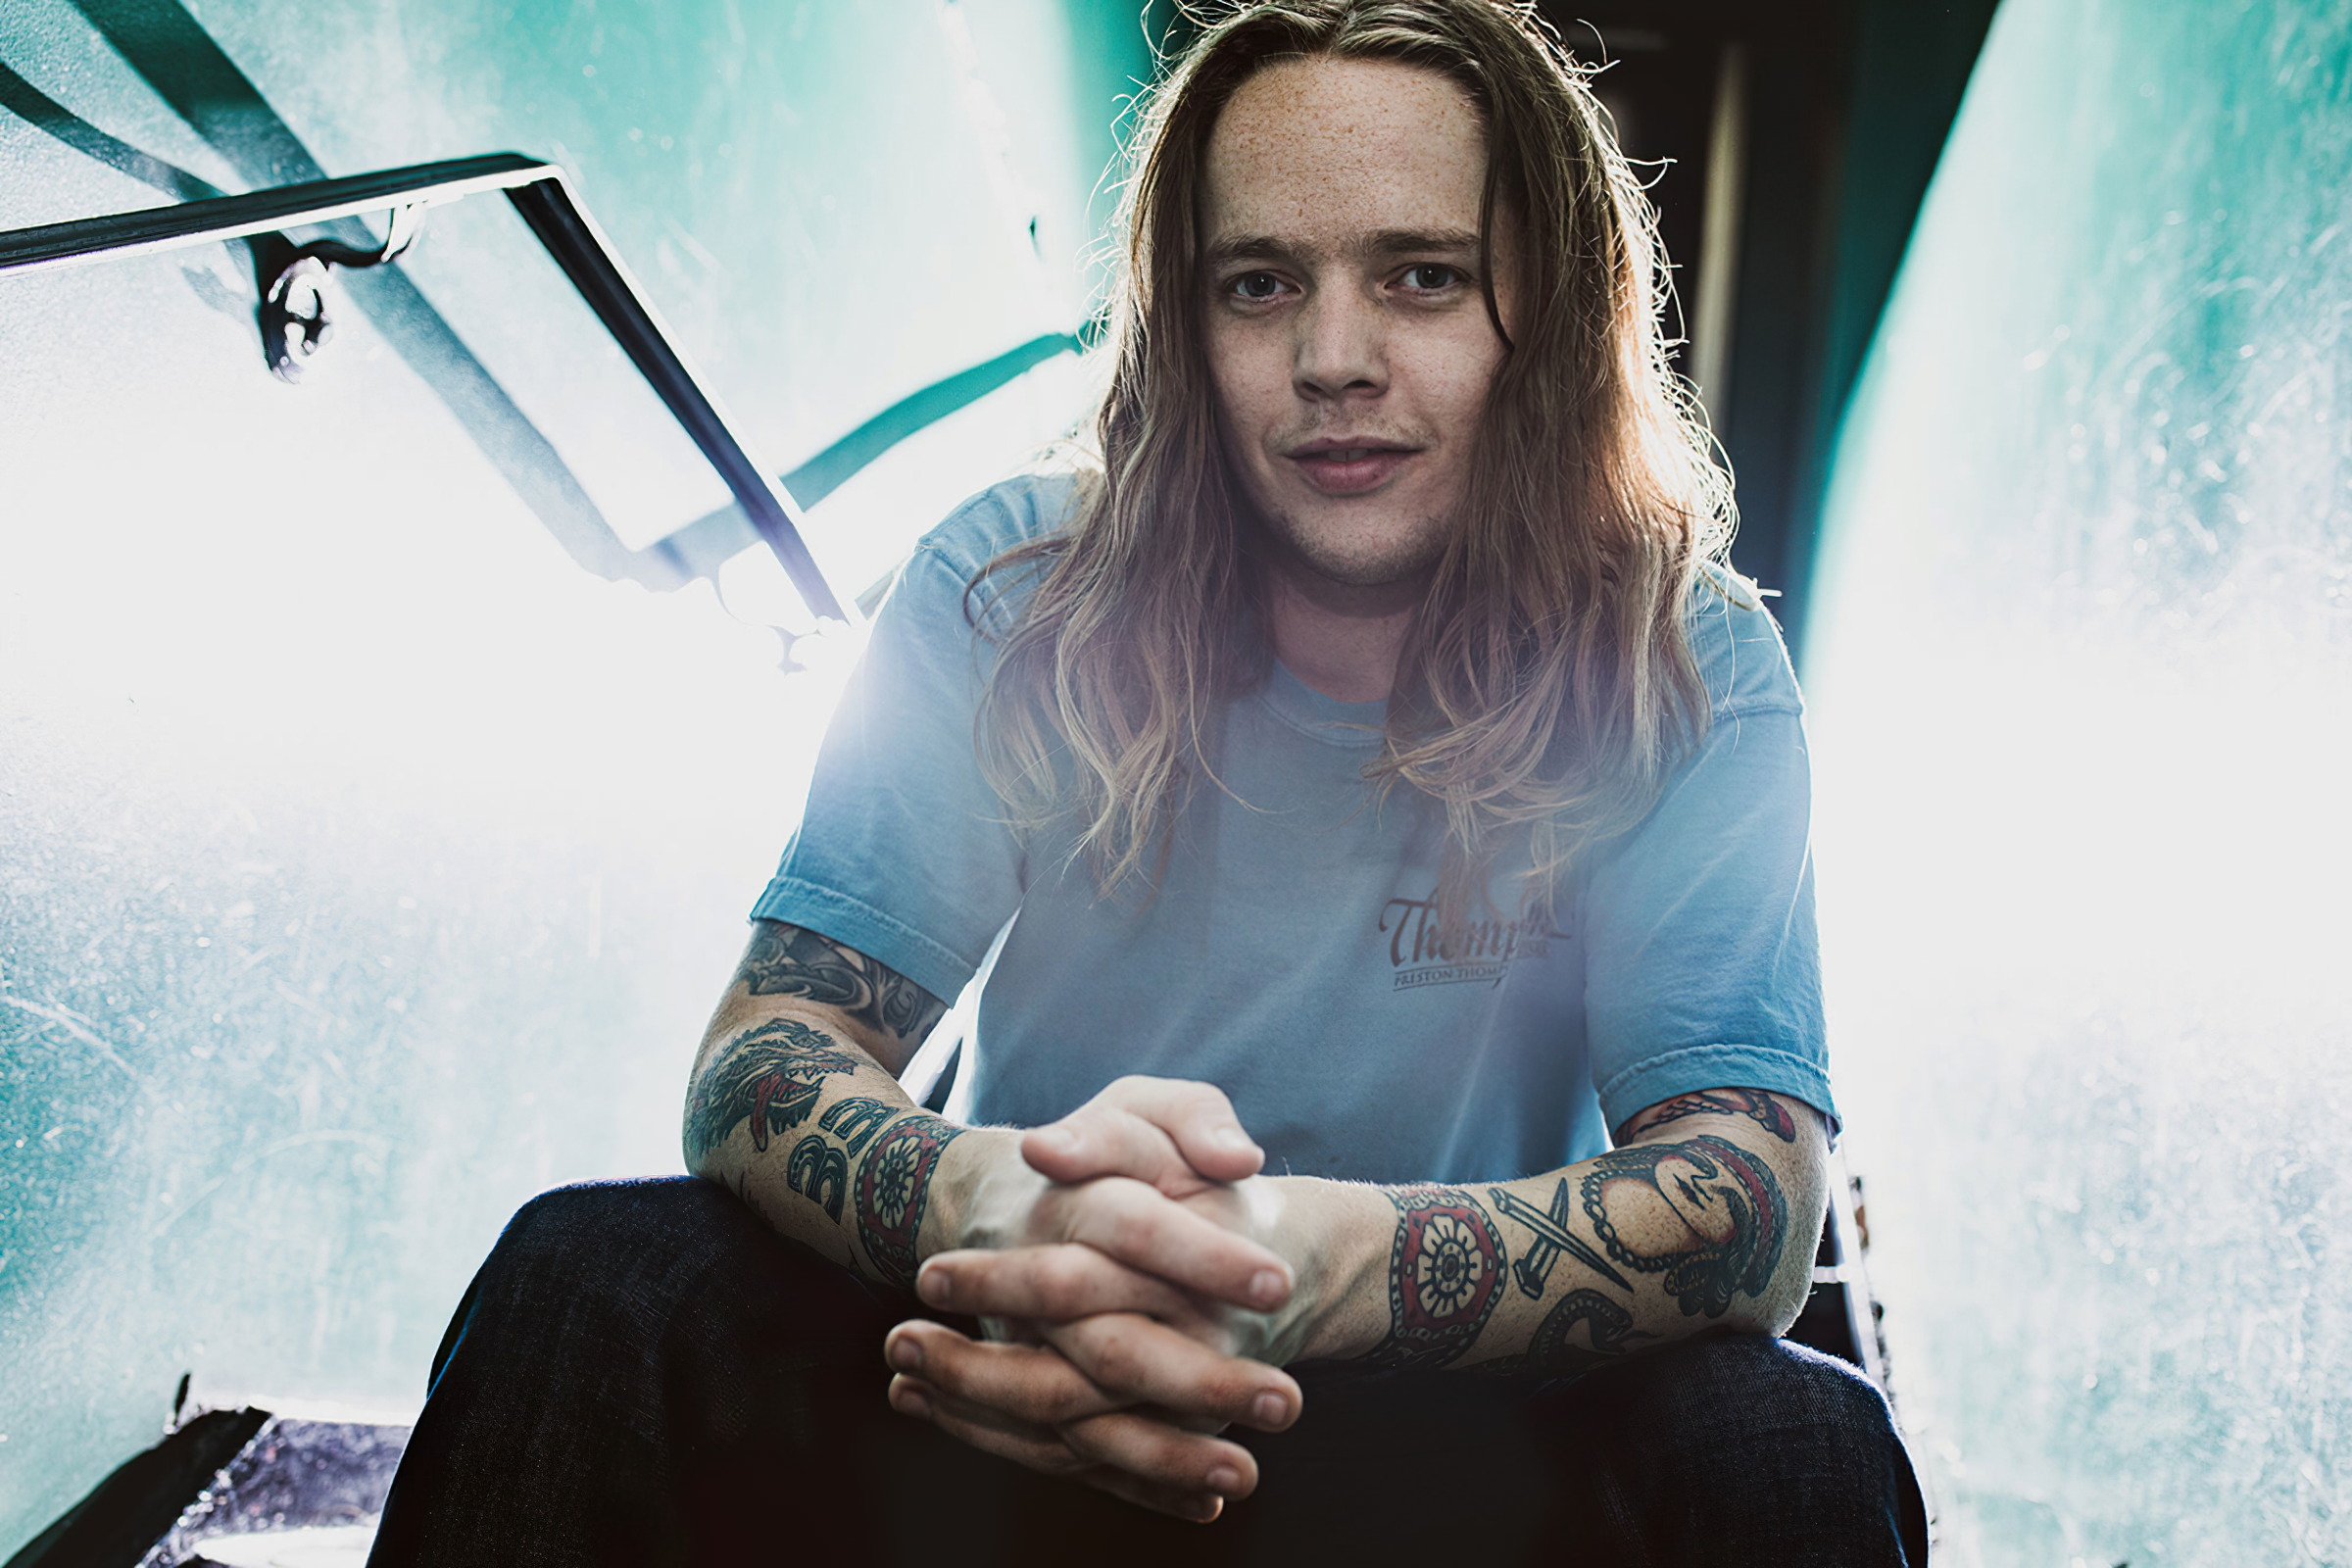 Music Billy Strings HD Wallpaper | Background Image